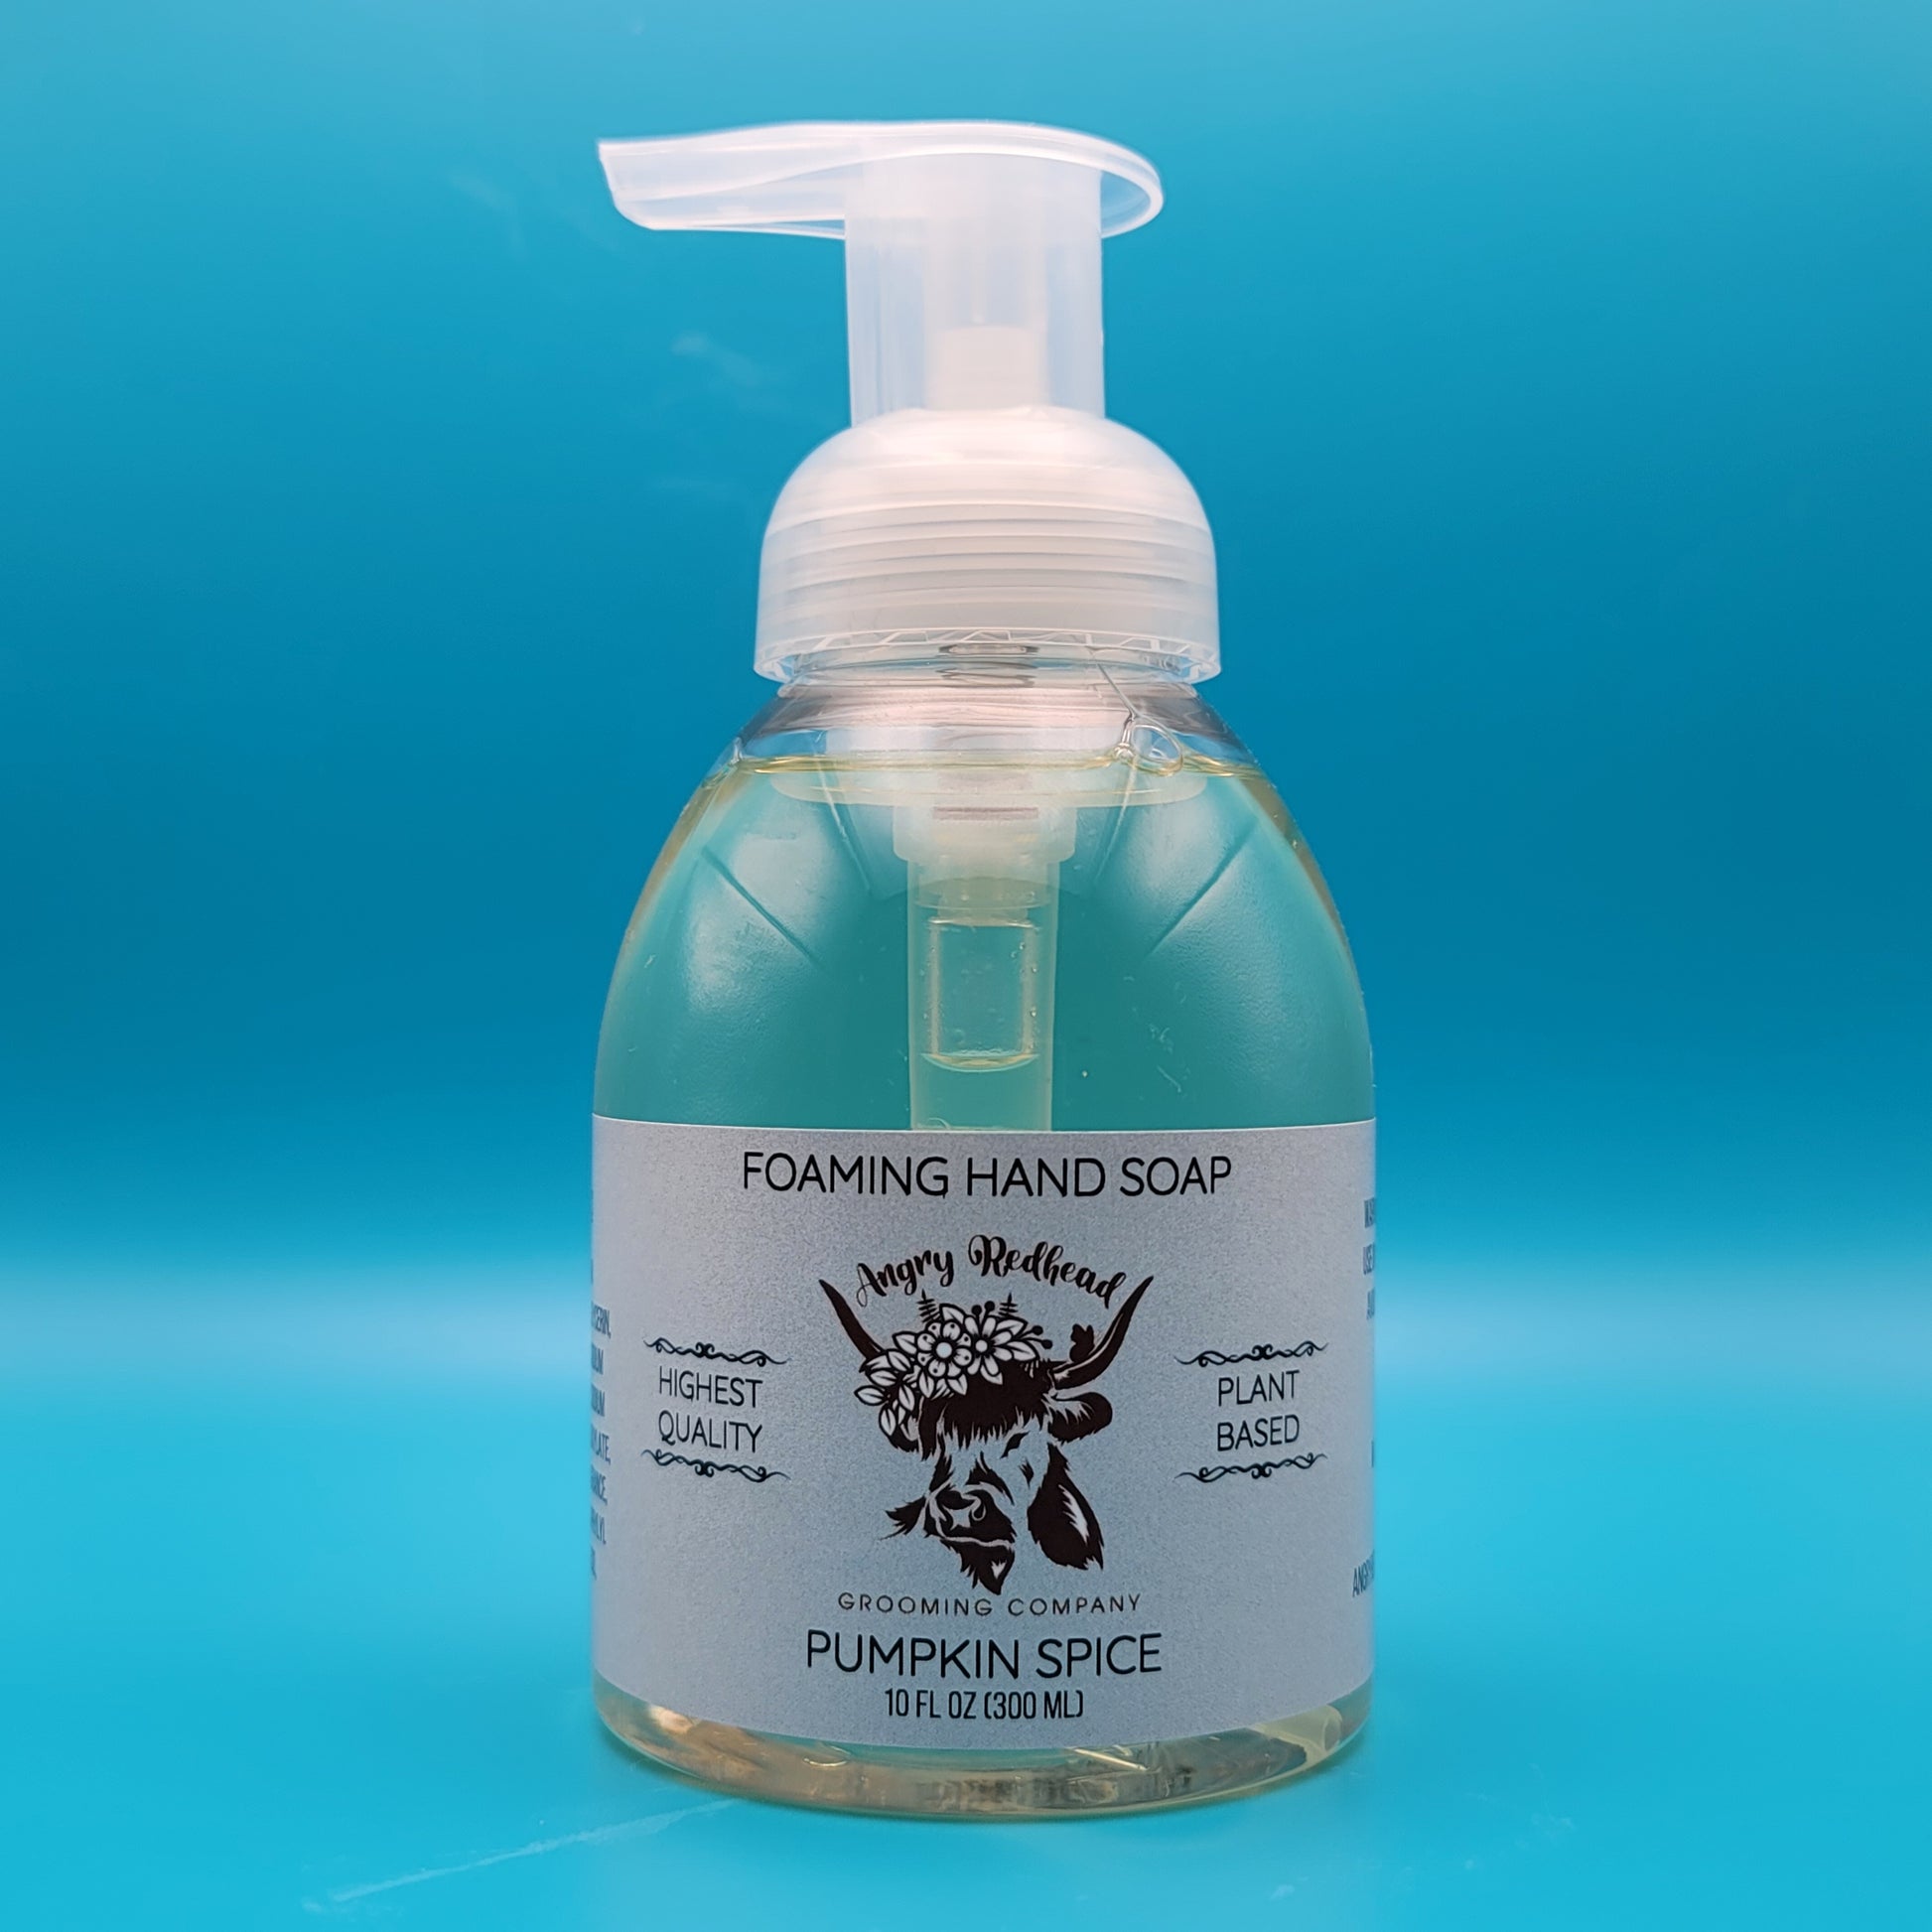 Foaming Hand Soap by Angry Redhead Grooming Co - angryredheadgrooming.com